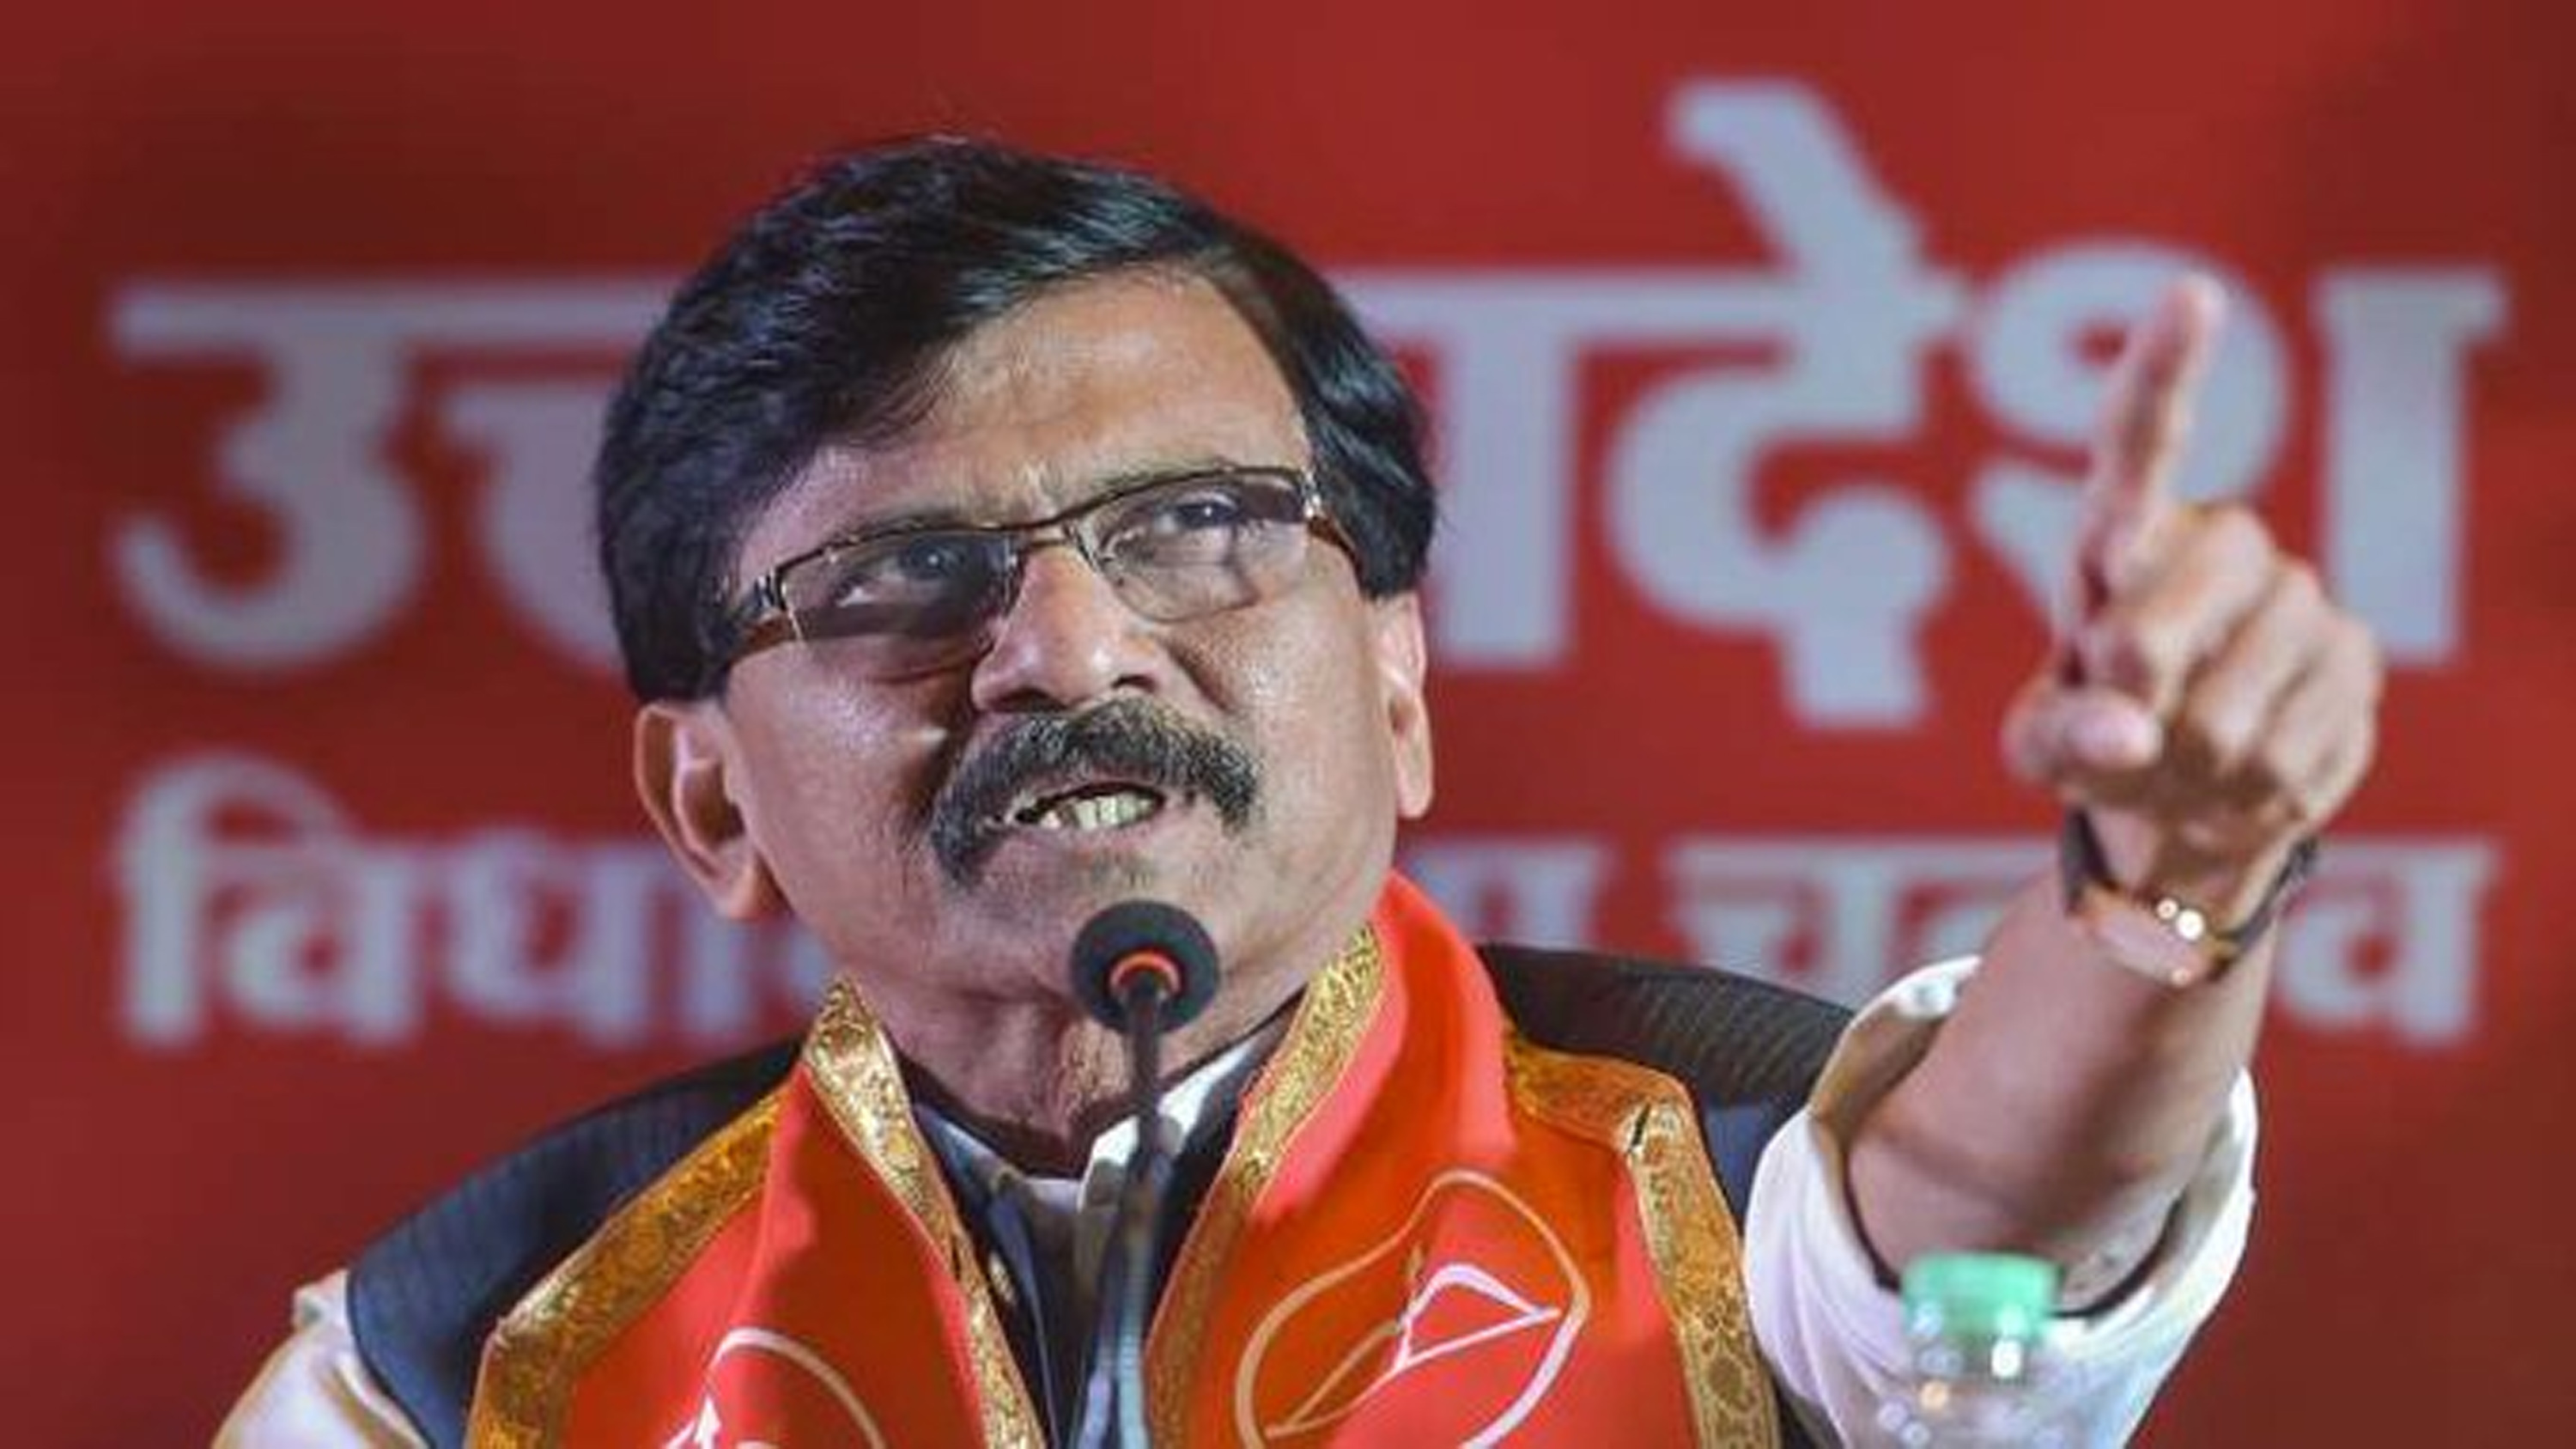 T20 WC: Sanjay Raut claims Pak’s victory celebrated in Kashmir amid anti-India slogans, asks Centre to take it ‘seriously’